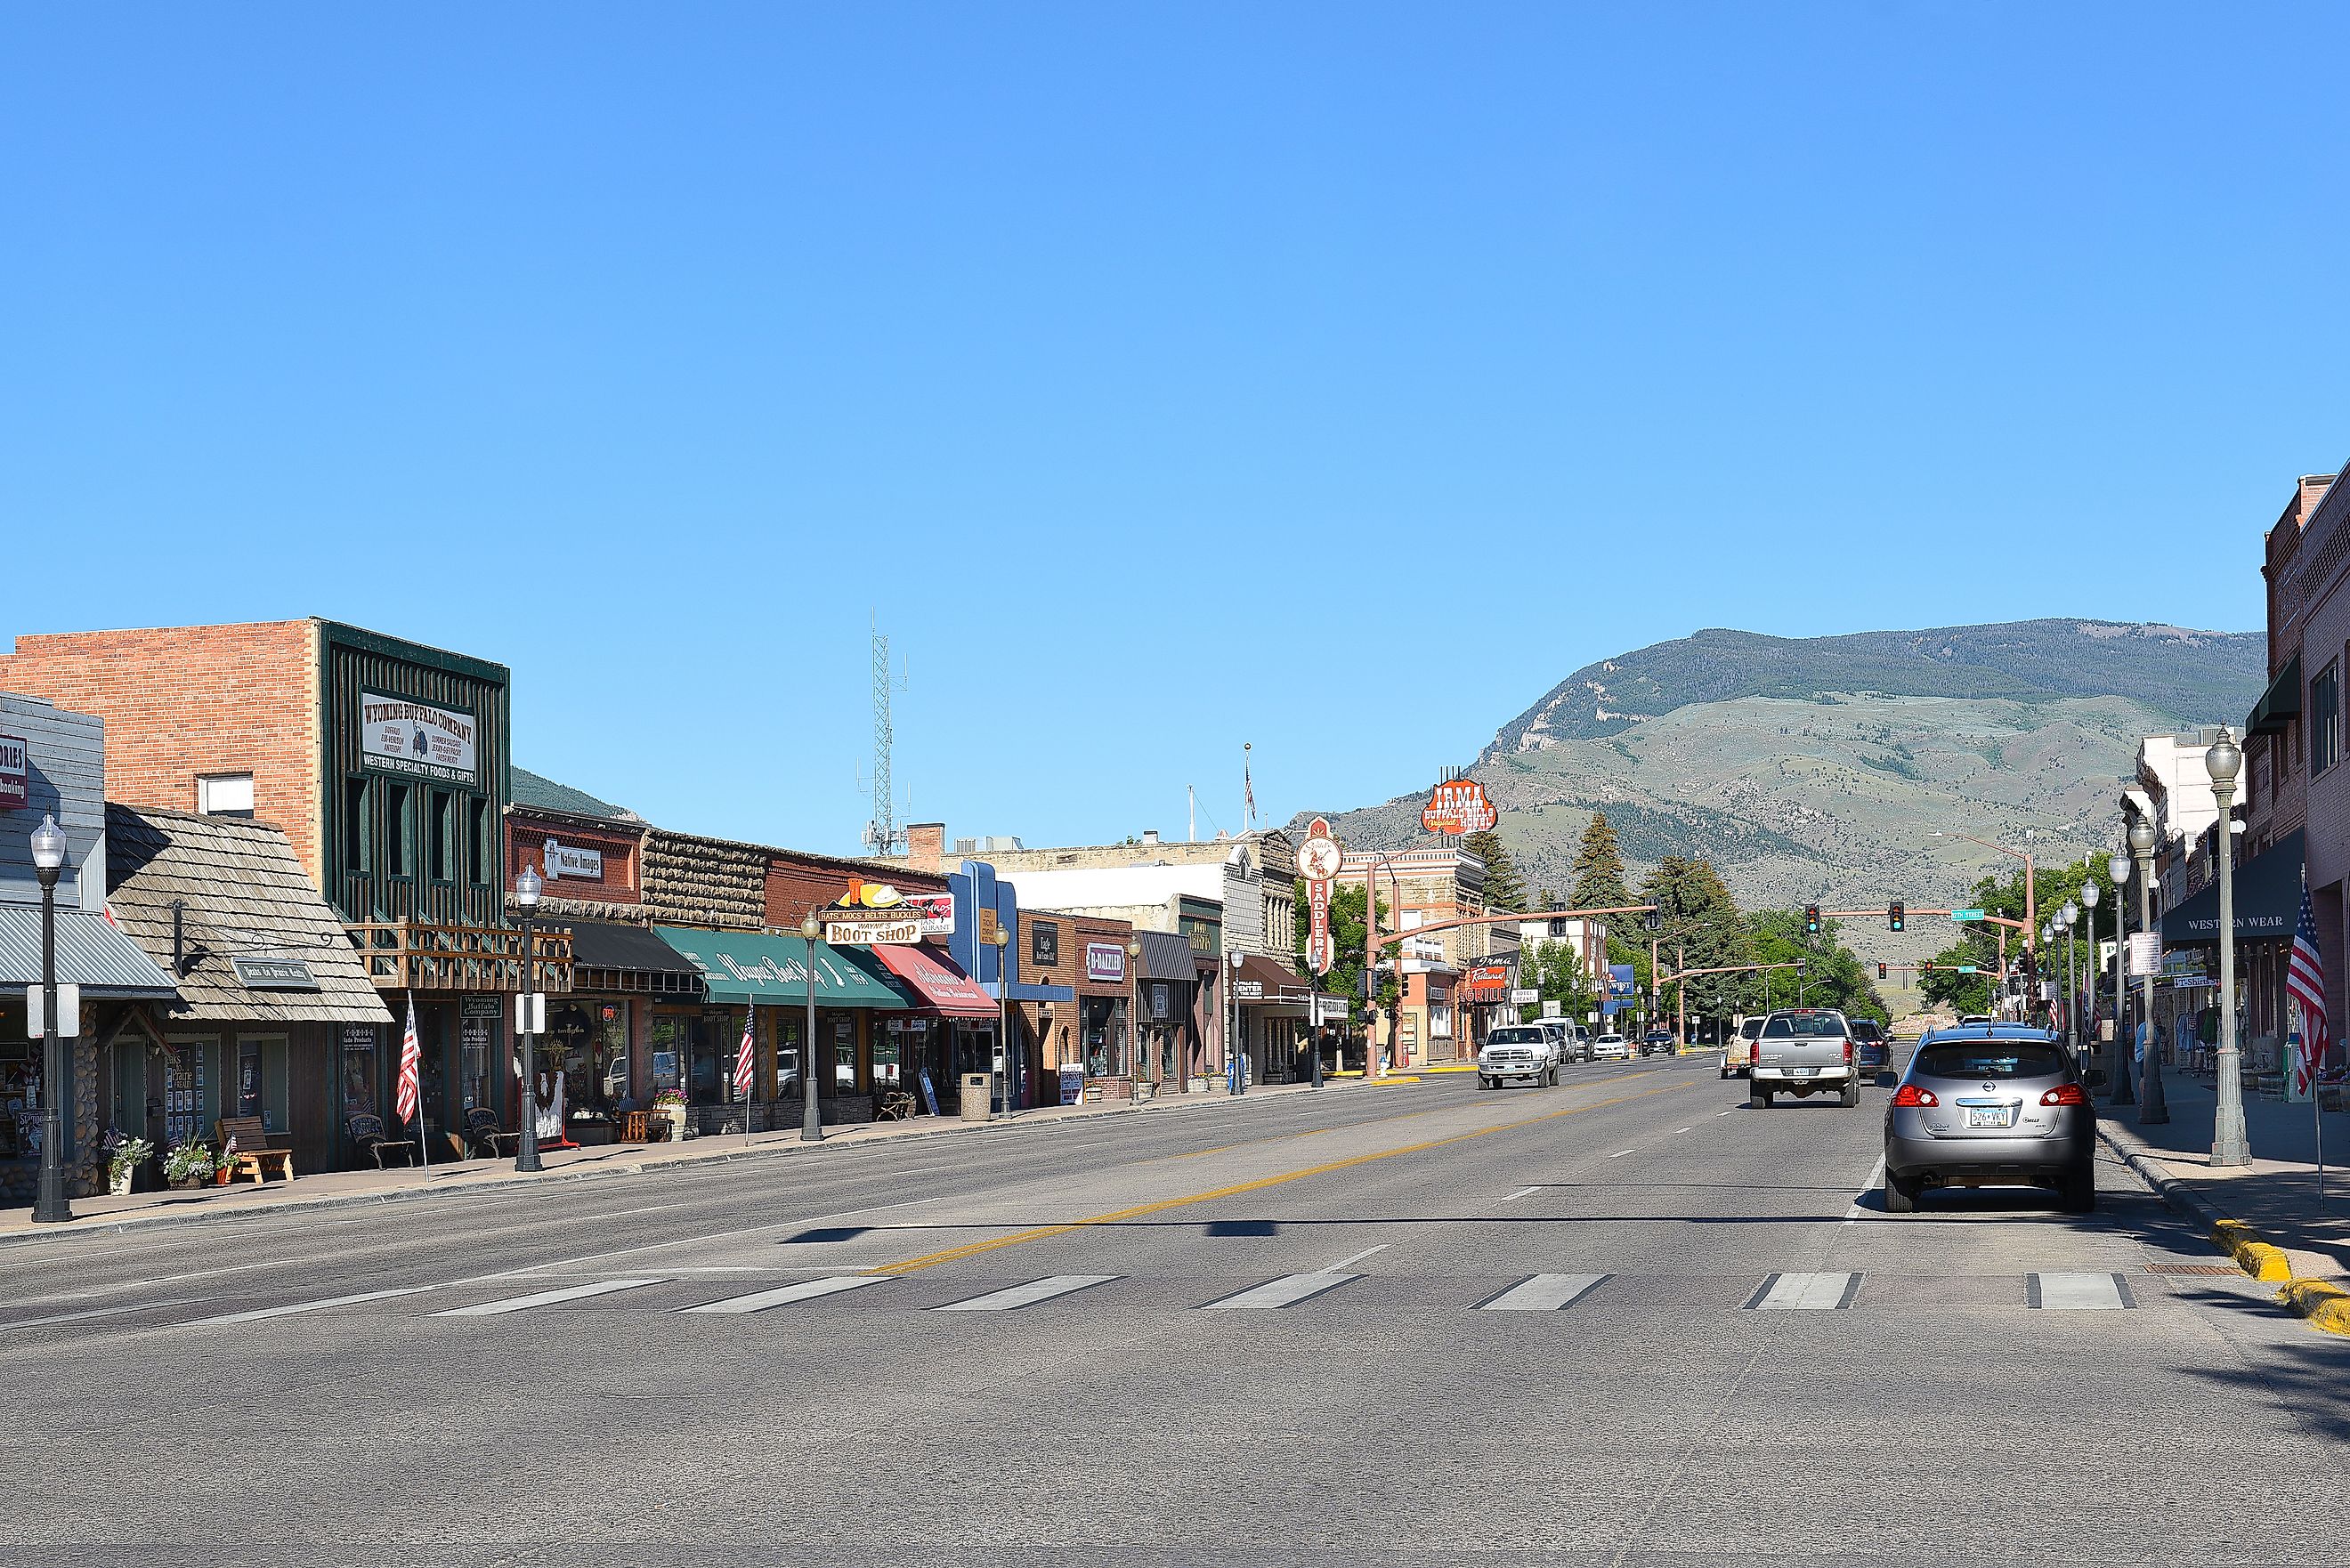 Sheridan Avenue in Cody, Wyoming. The street is the main business and tourist route in the famous western town.